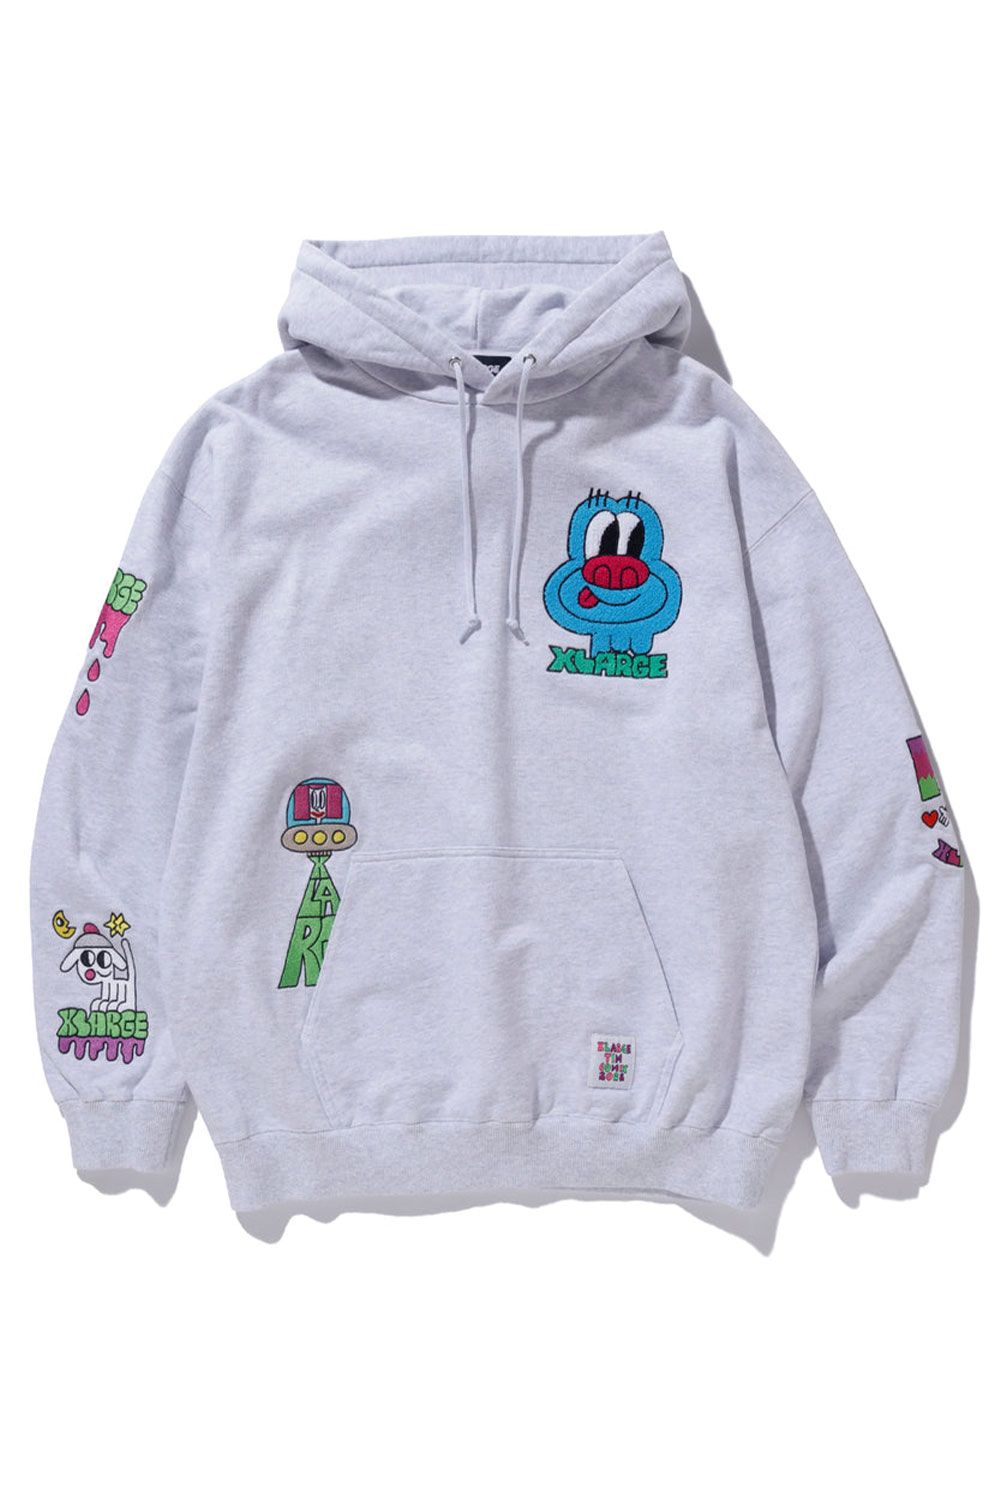 XLARGE - TIM COMIX CHENILLE EMBROIDERED HOODED SWEAT / ブラック 